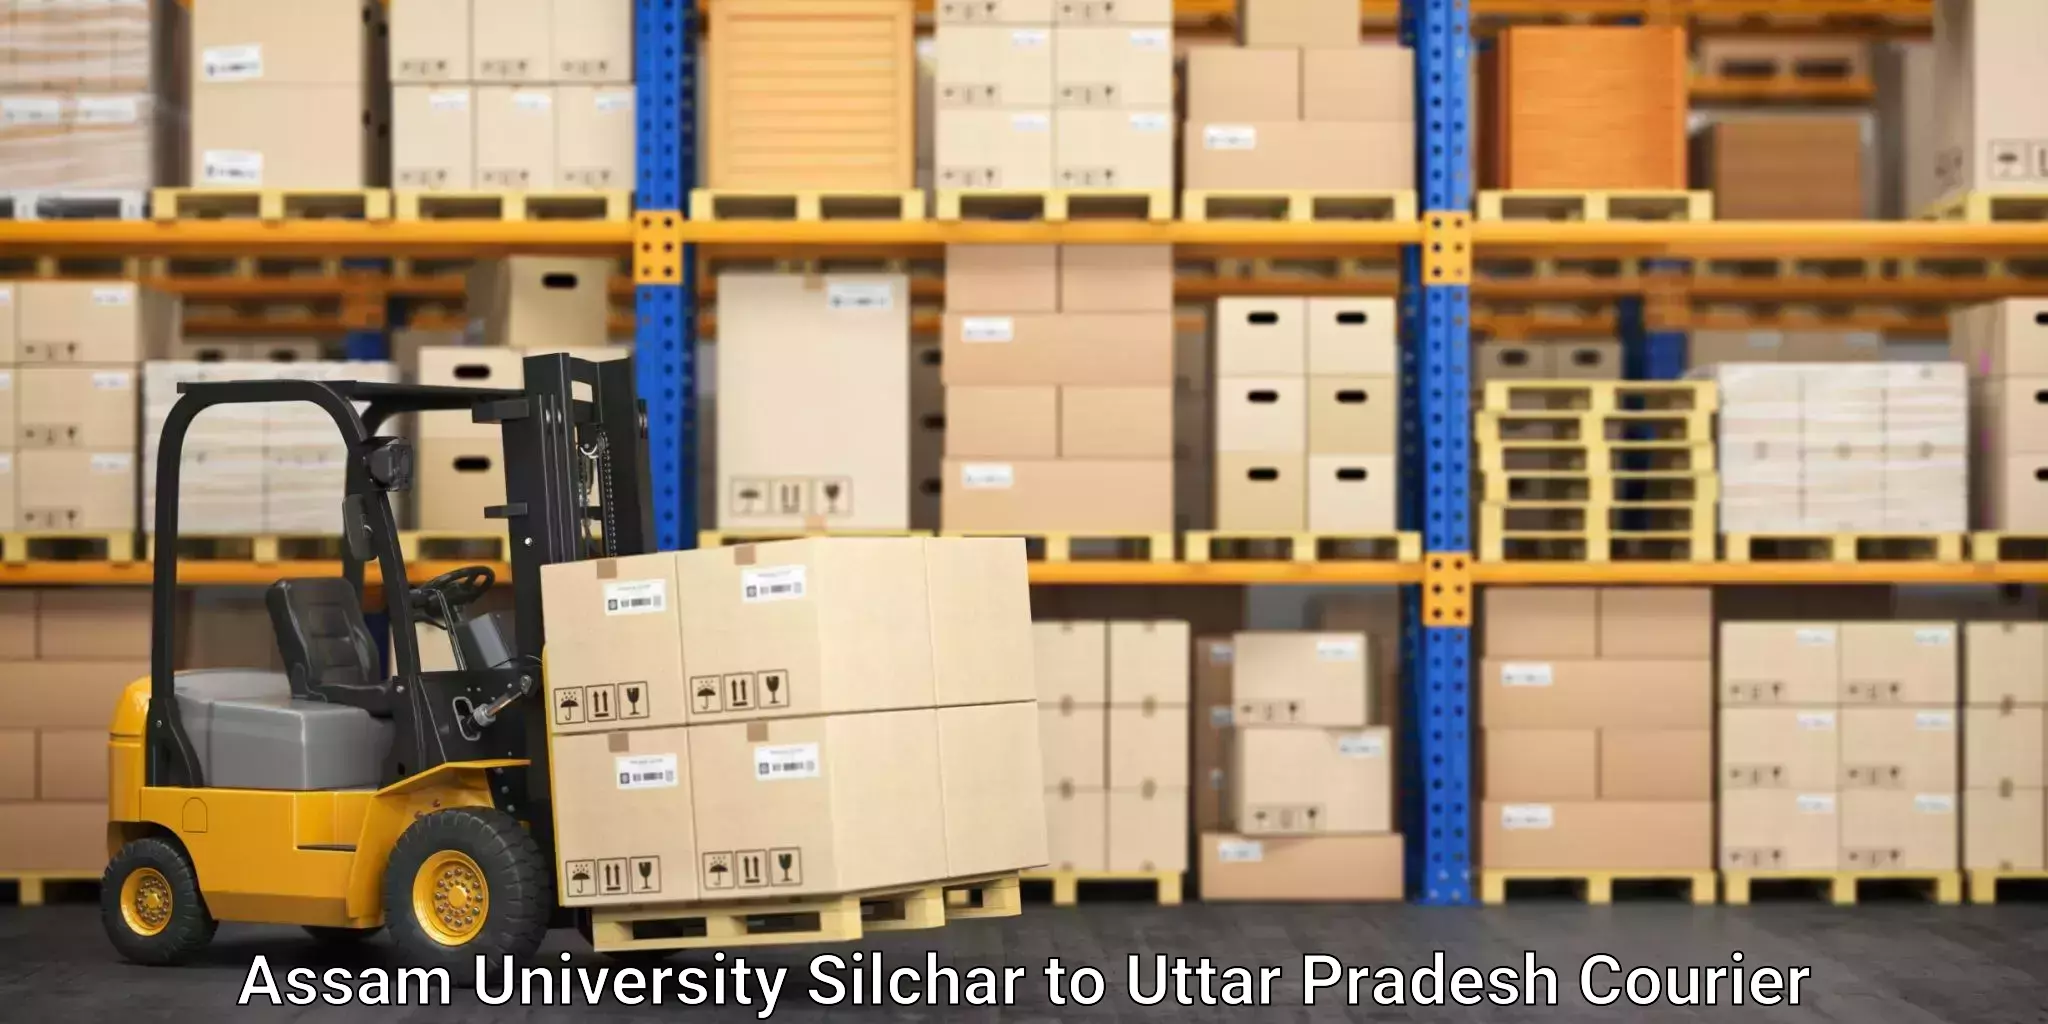 Multi-carrier shipping Assam University Silchar to Shahjahanpur